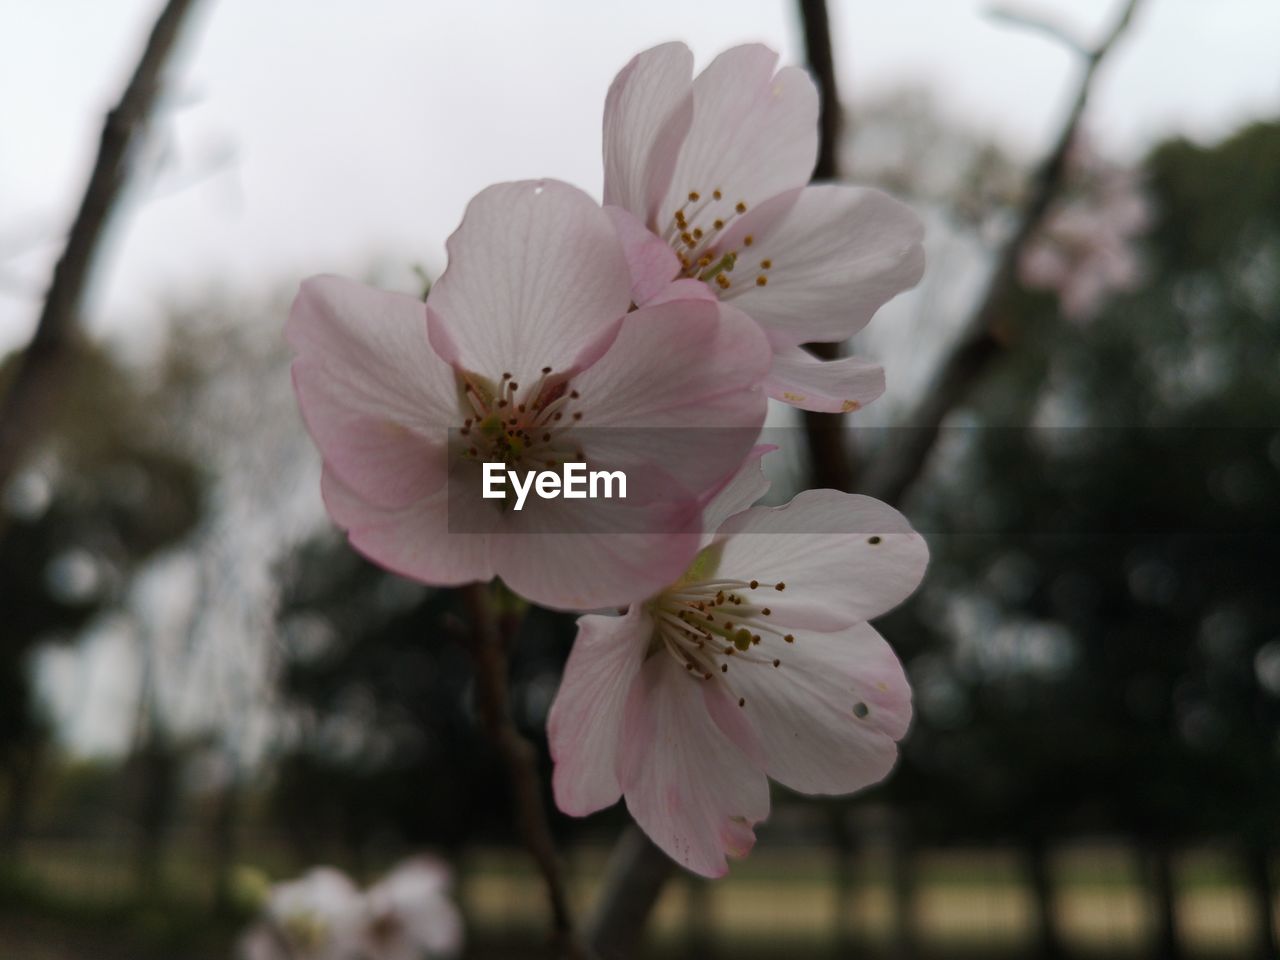 plant, flower, flowering plant, freshness, blossom, beauty in nature, fragility, pink, springtime, tree, growth, close-up, petal, flower head, inflorescence, pollen, cherry blossom, focus on foreground, nature, spring, branch, botany, stamen, no people, outdoors, twig, macro photography, fruit tree, day, sky, white, produce, food, selective focus